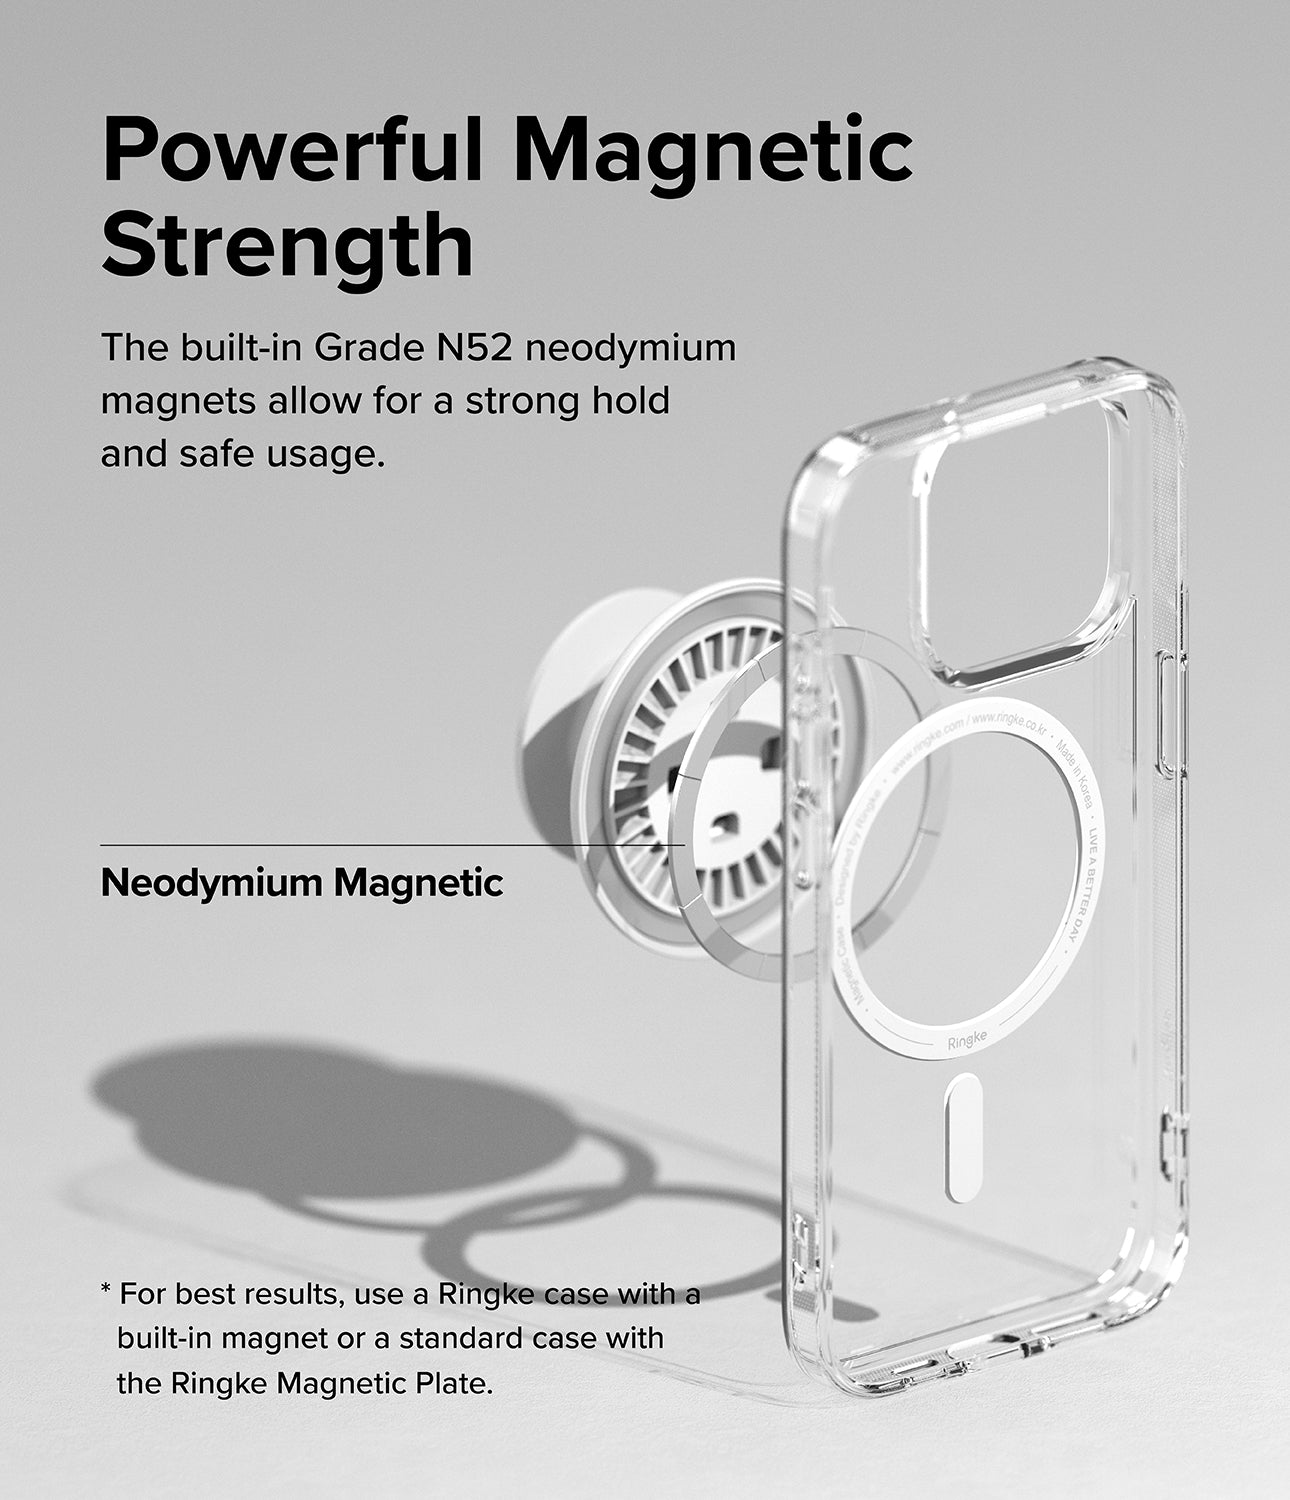 Ringke Glossy Tok Magnetic - Powerful Magnetic Strength. The built-in Grade N52 neodymium magnets allow for a strong hold and safe usage,